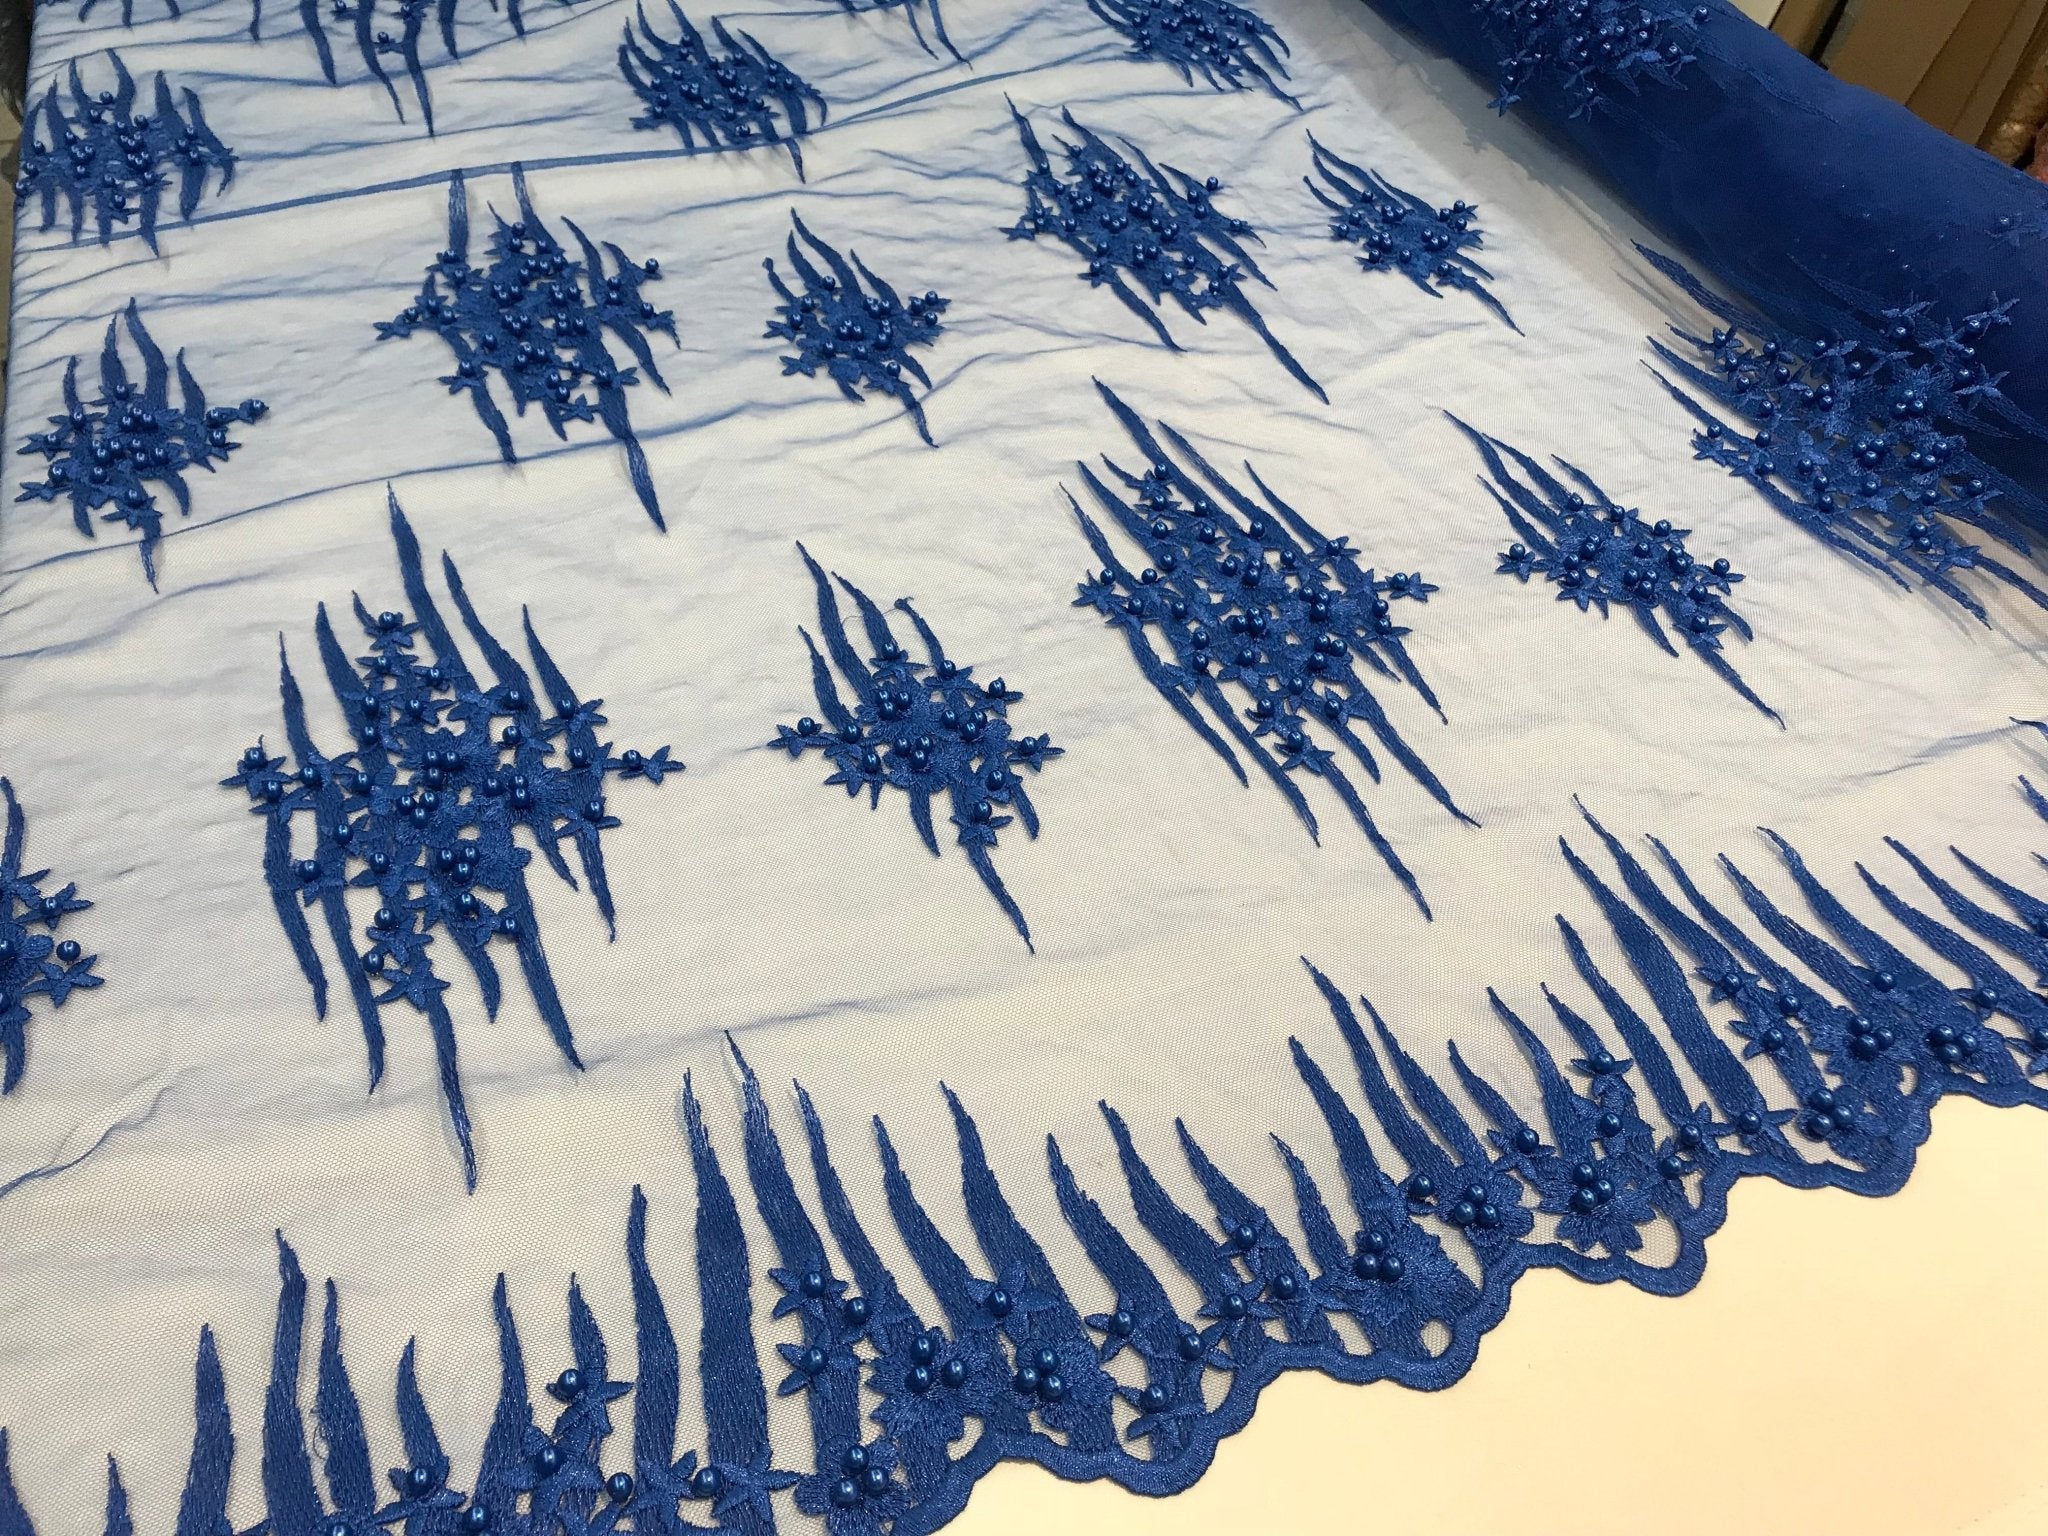 Royal Blue Design Beaded Fabric,Lace Fabric By The Yard-Embroider Beaded For Bridal-Floral Mesh Dress Lace Prom-Nightgown skirts runnersICE FABRICSICE FABRICSRoyal Blue Design Beaded Fabric,Lace Fabric By The Yard-Embroider Beaded For Bridal-Floral Mesh Dress Lace Prom-Nightgown skirts runners ICE FABRICS